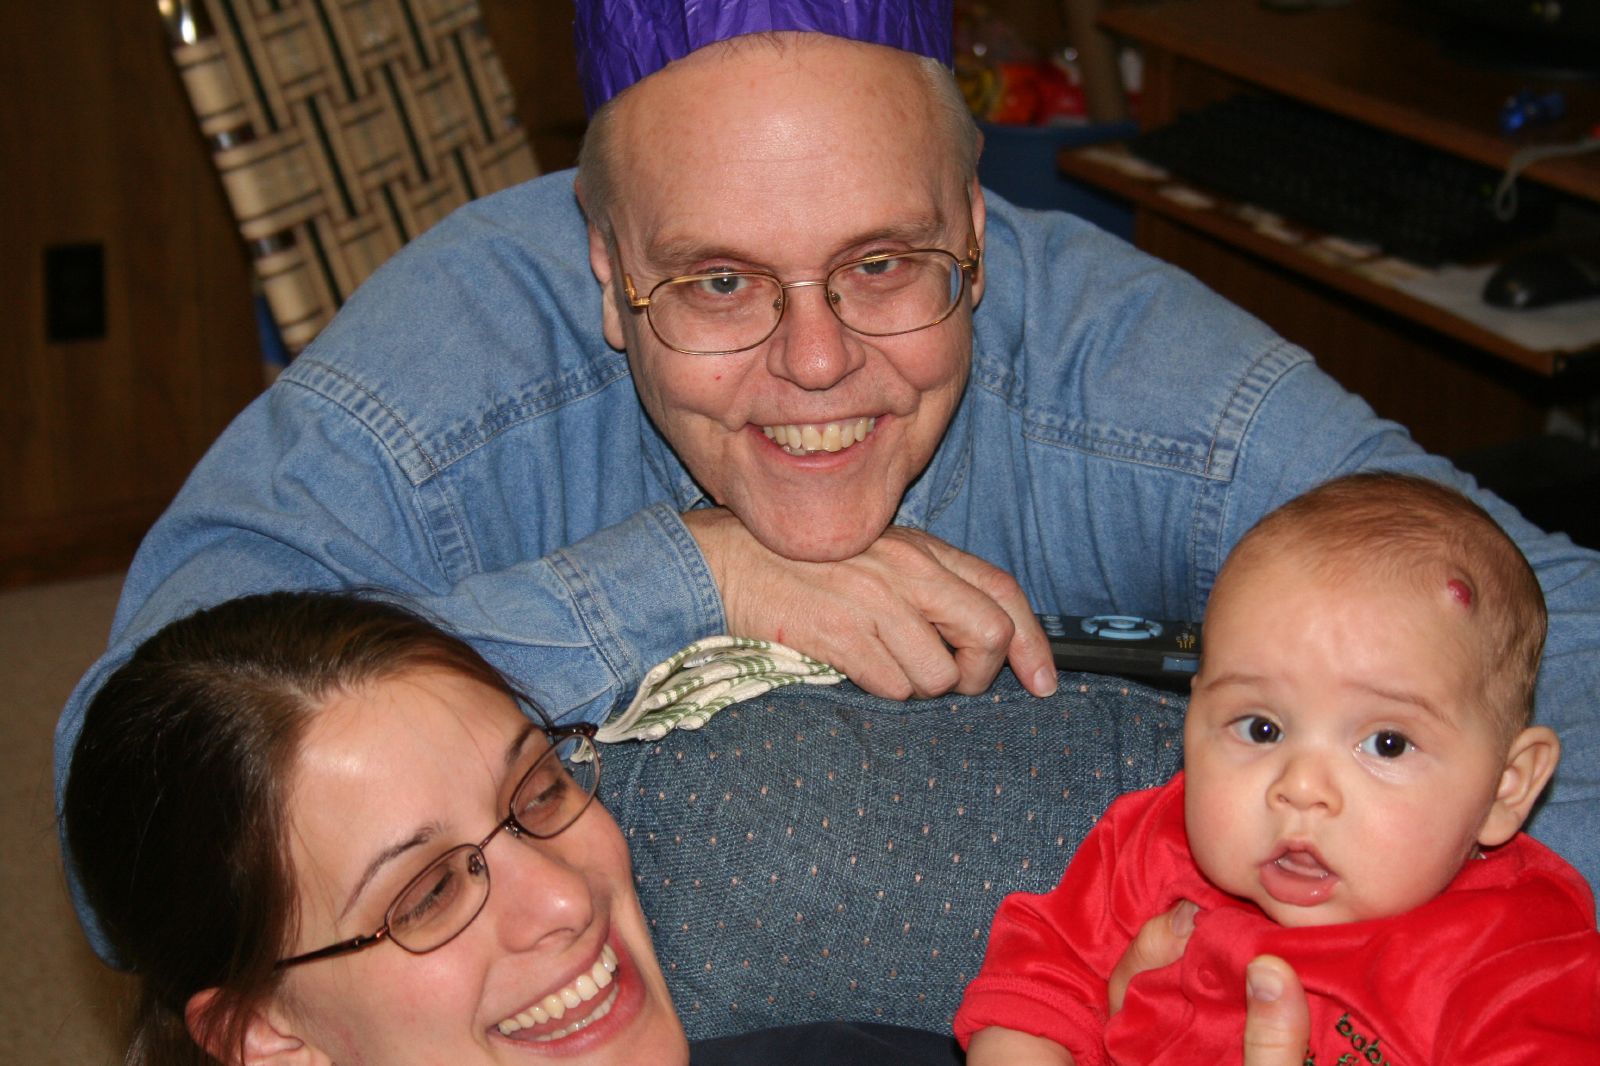 a smiling man holding a baby wearing glasses